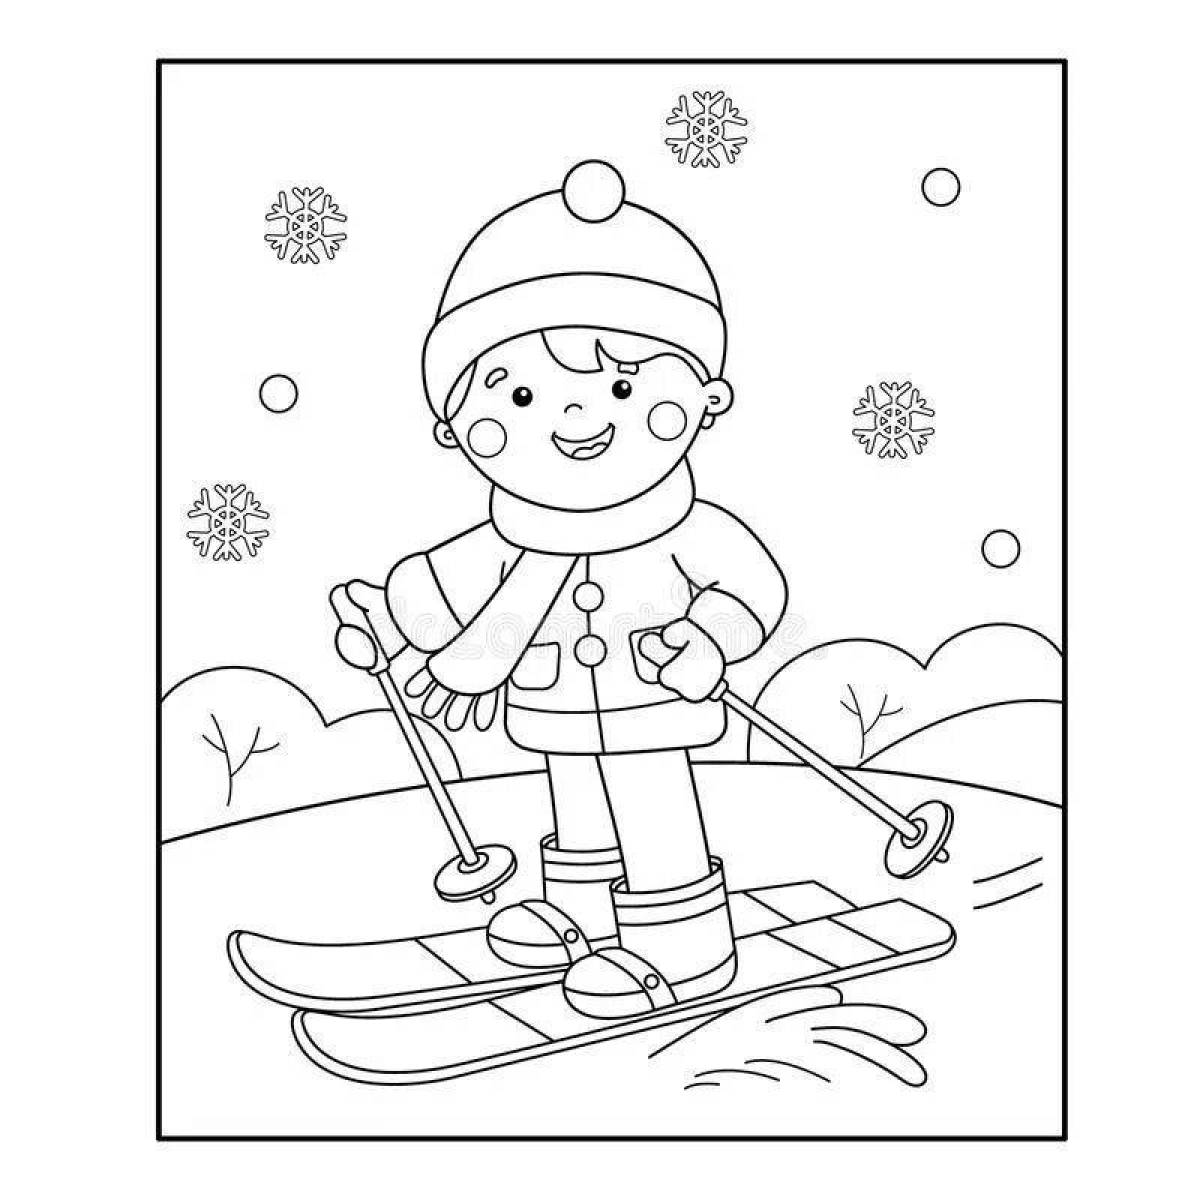 Coloring book excited skiing boy